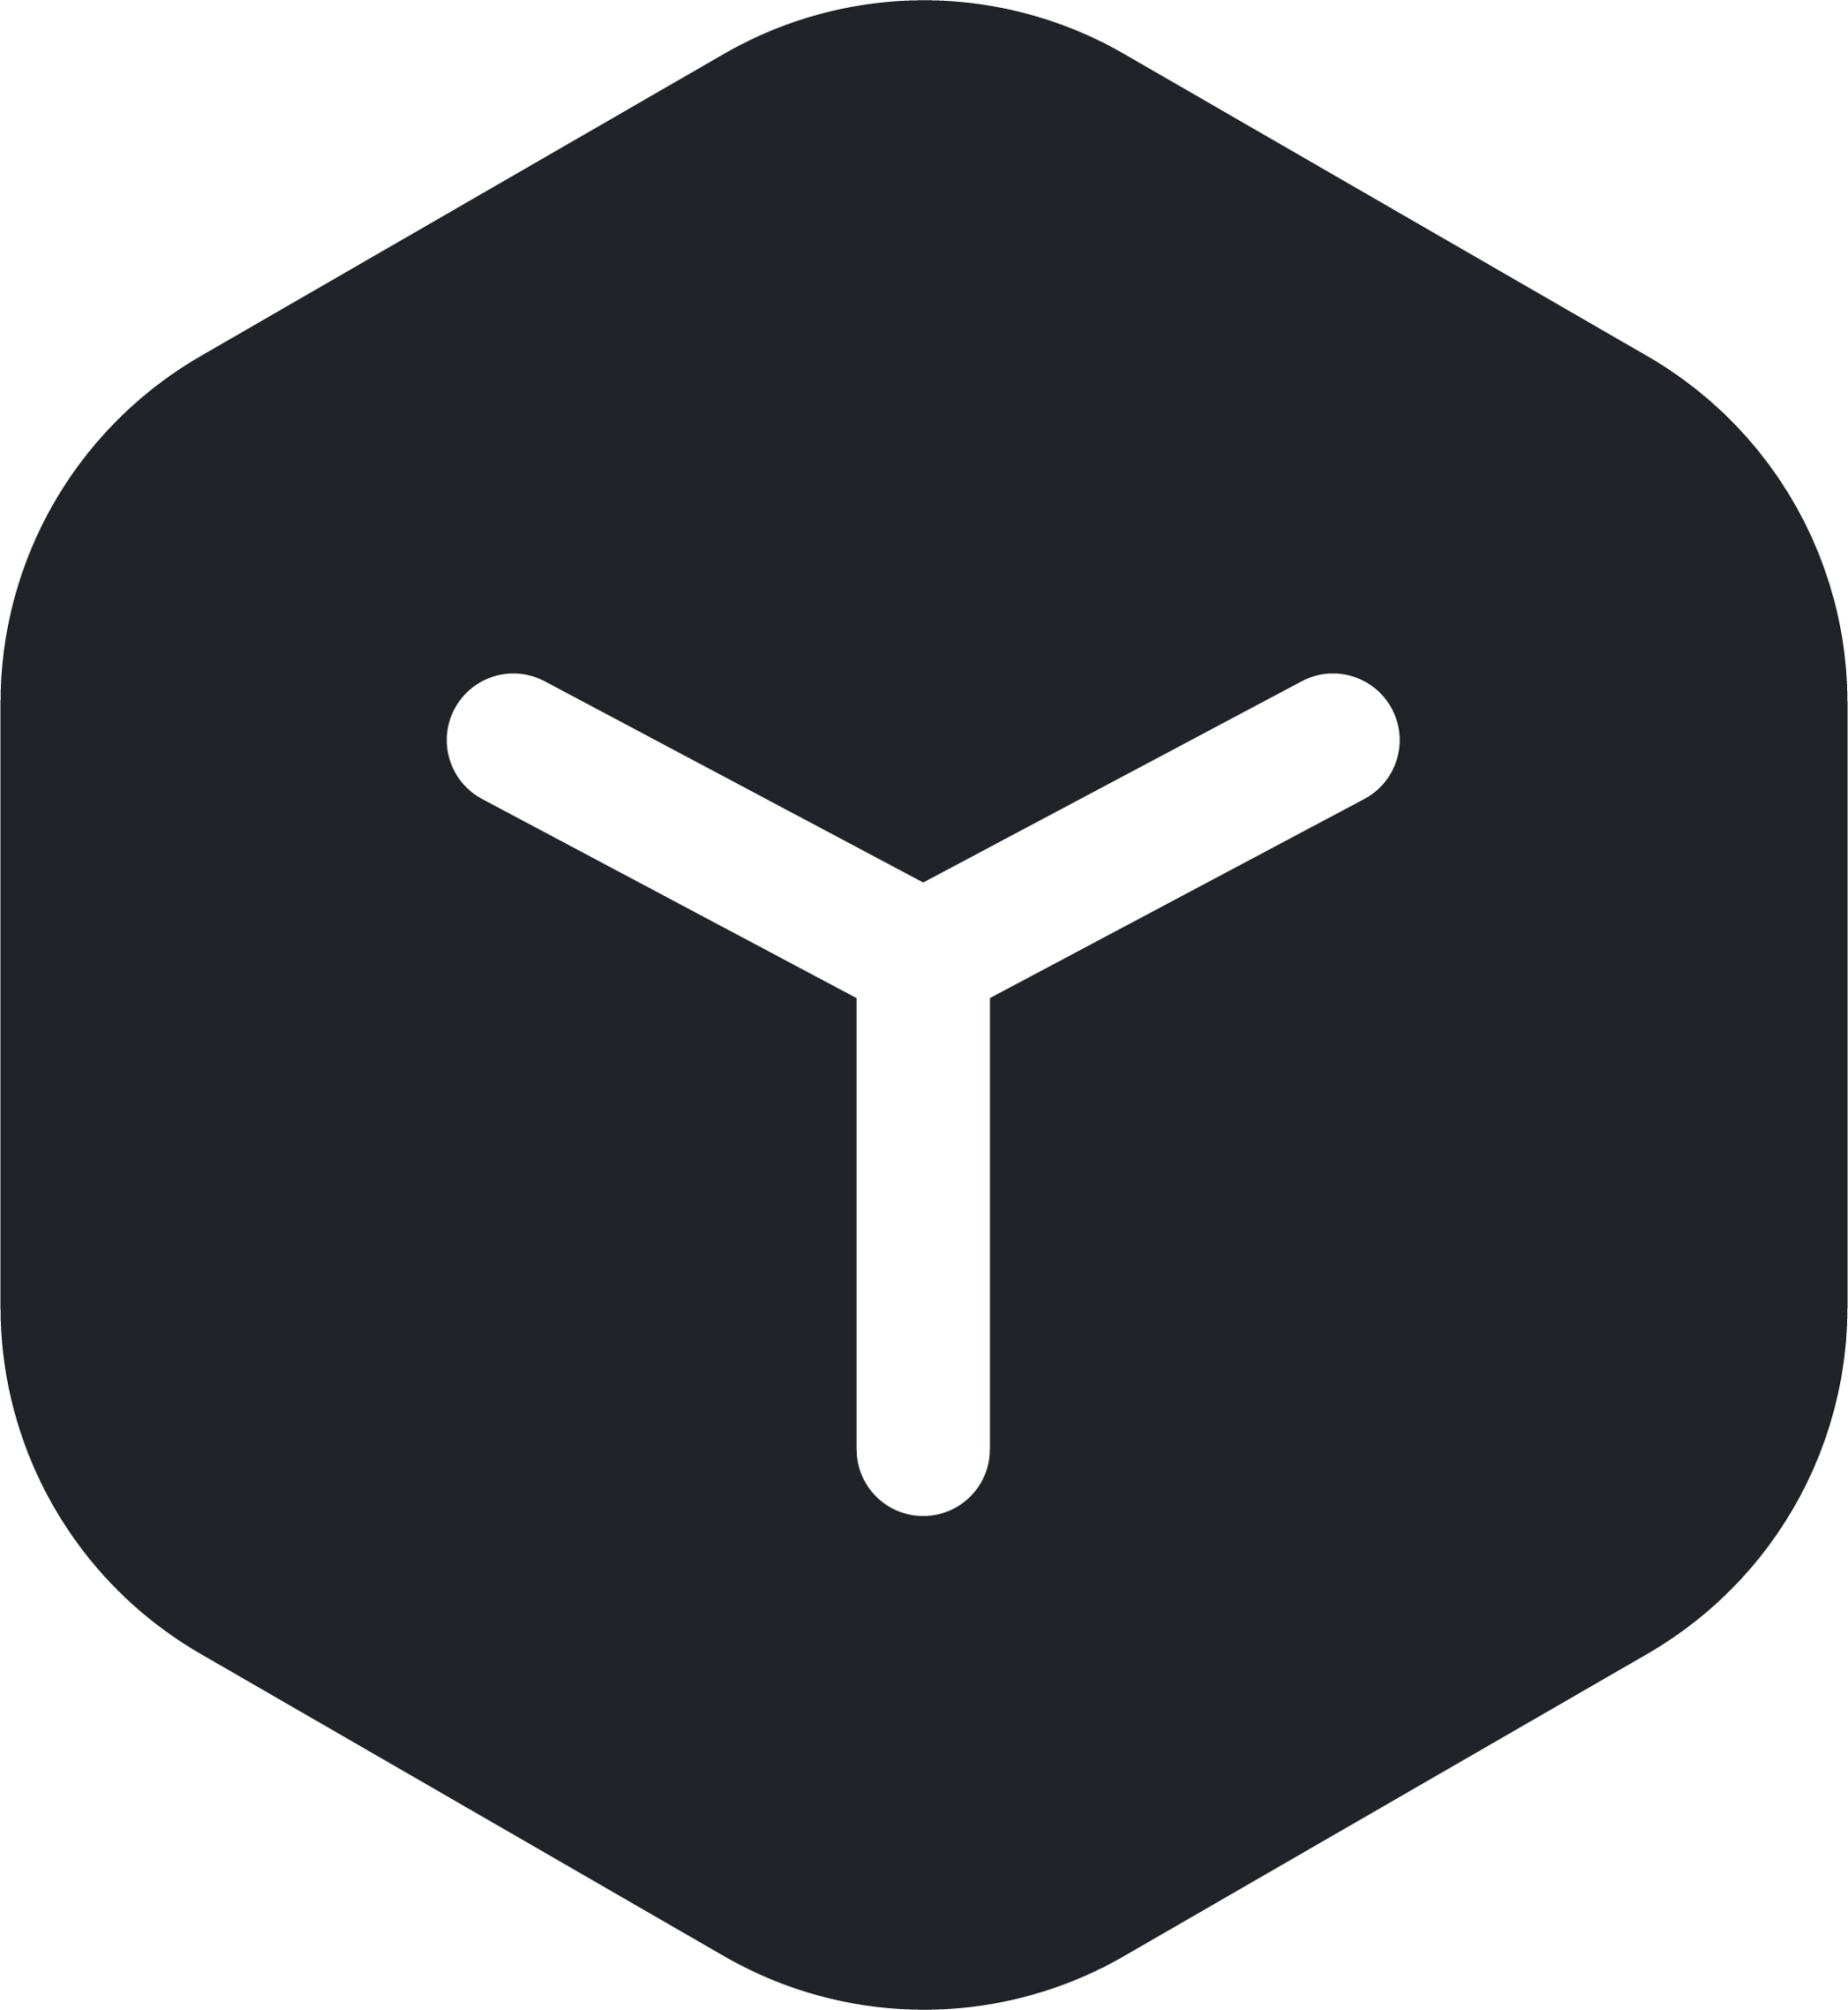 product (rounded filled) icon